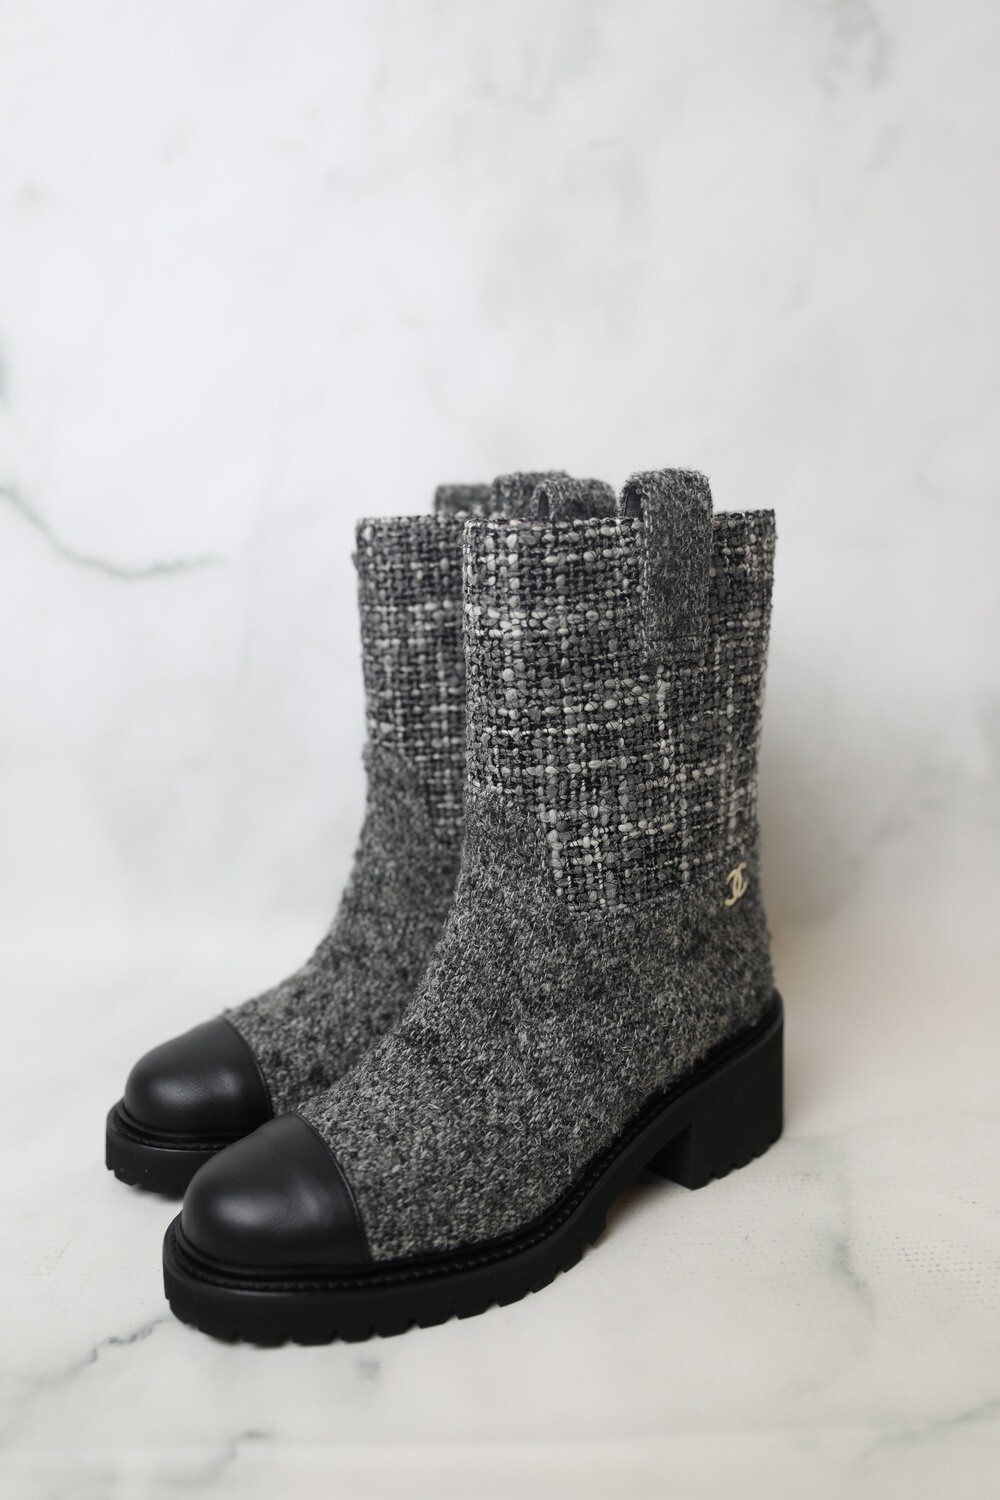 Chanel Gray Classic Tweed Leather Grosgrain Silk CC Ankle Boots/Booties,  Size 36, New in Box GA001 - Julia Rose Boston